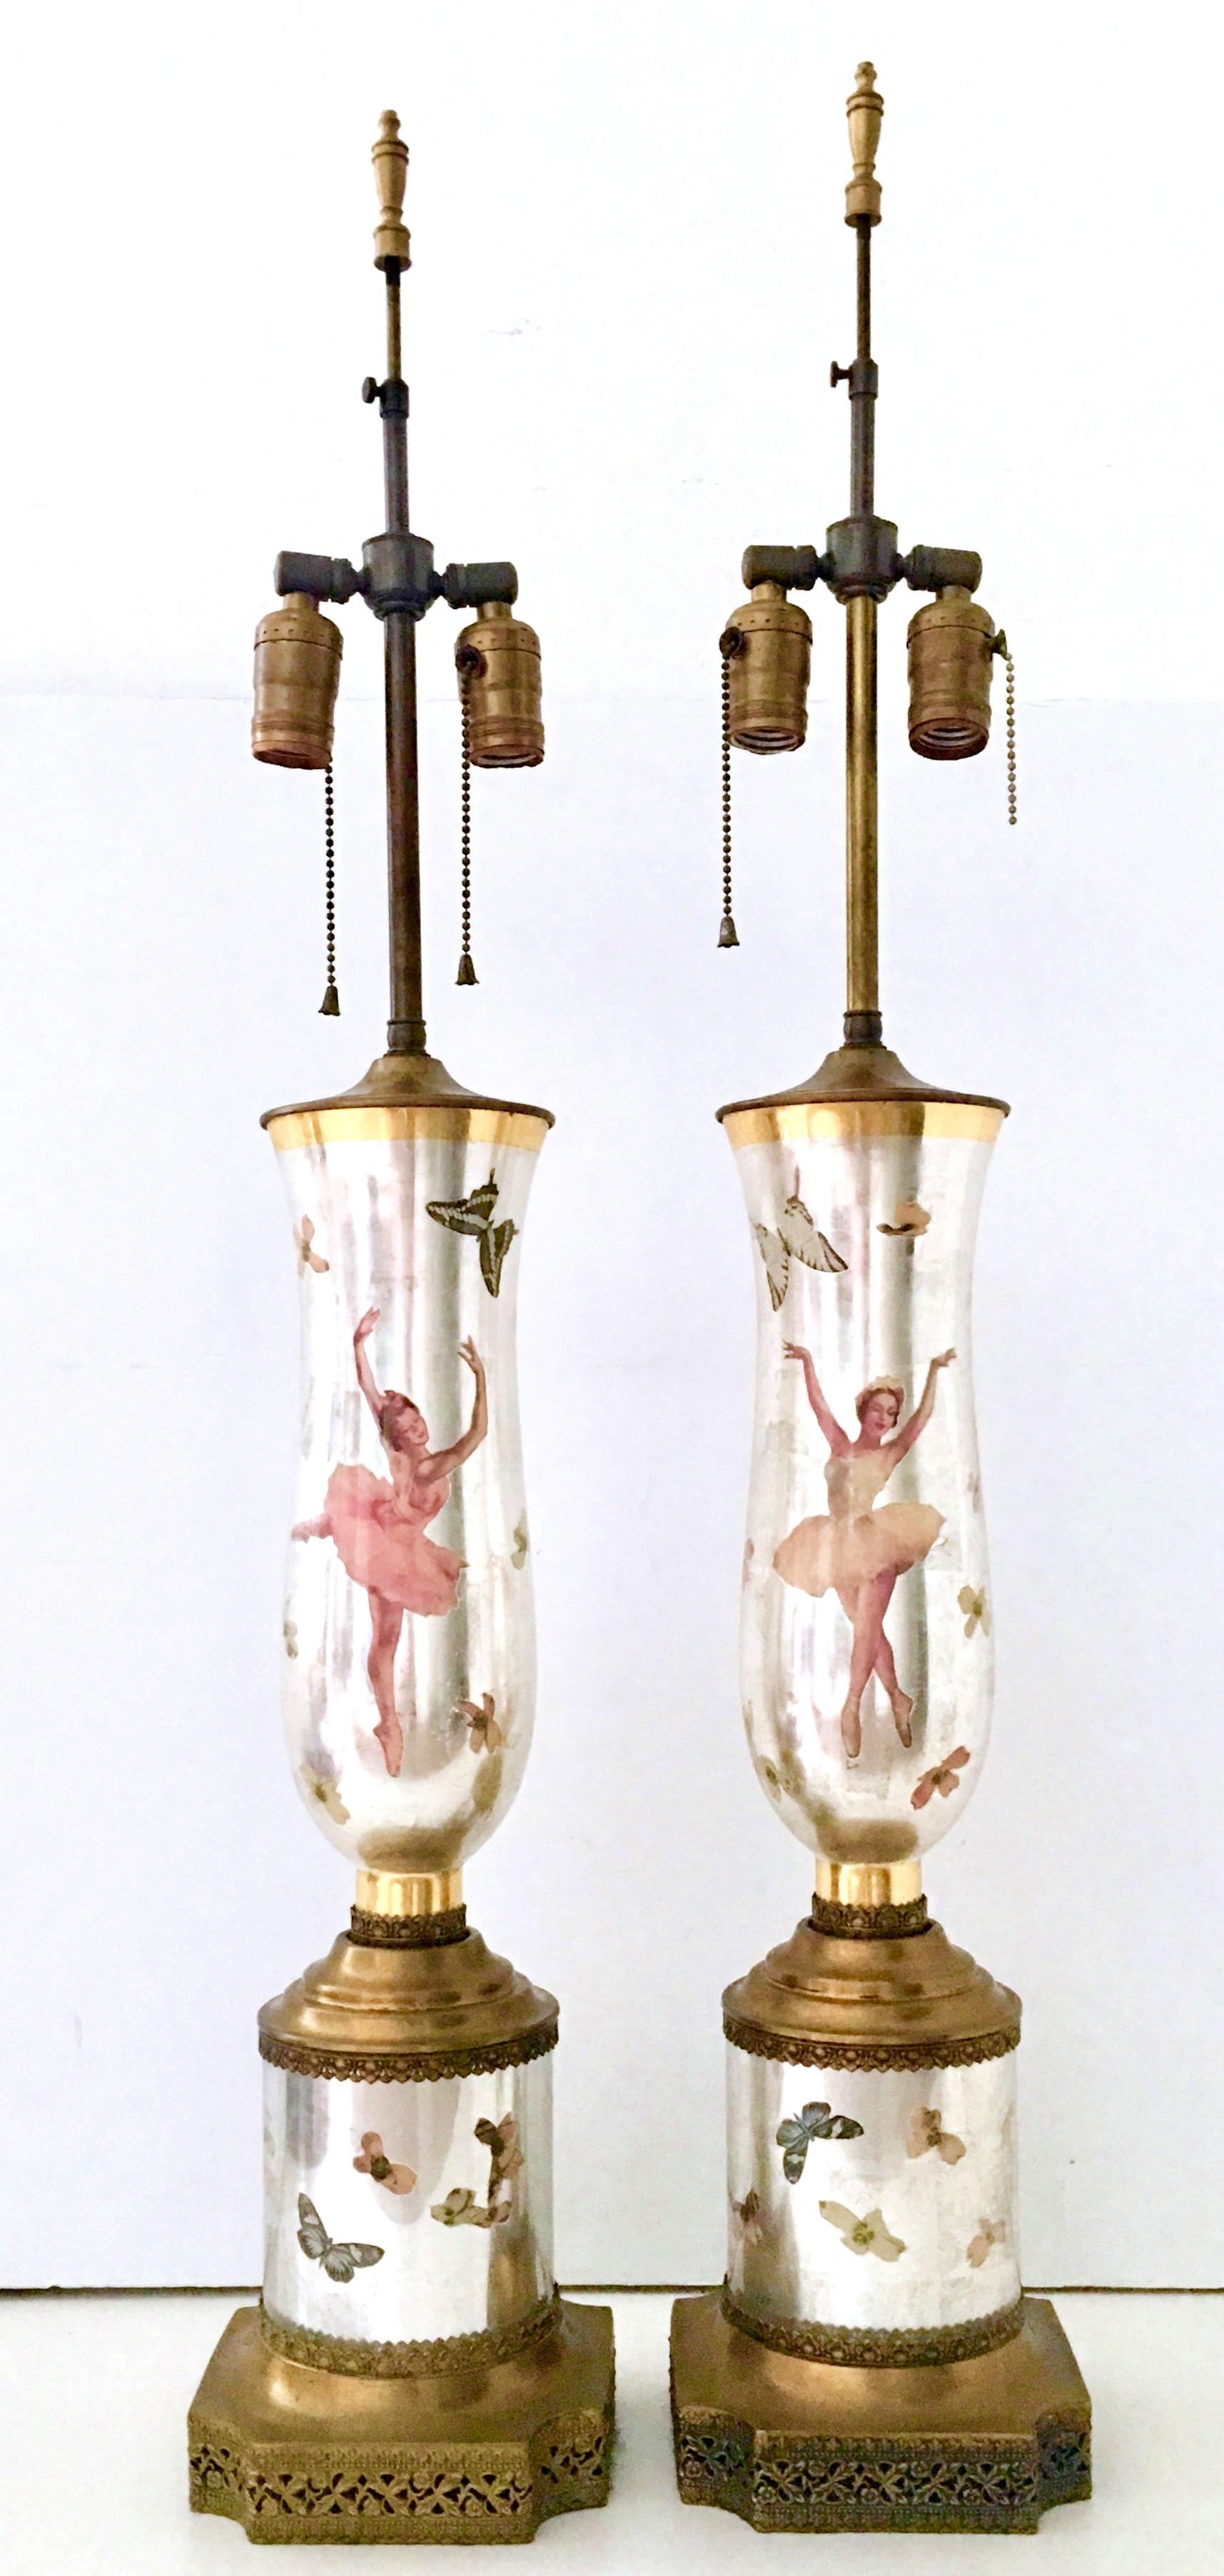 20th Century Fine Pair Of Art Deco Style Eglomise Reverse Painted Silver Art Glass Ballerina & Butterfly Decoupage  Lamps. Beautifully executed with original brass filigree hardware and fittings. Double socket pull chain detail.
Wired for the US and